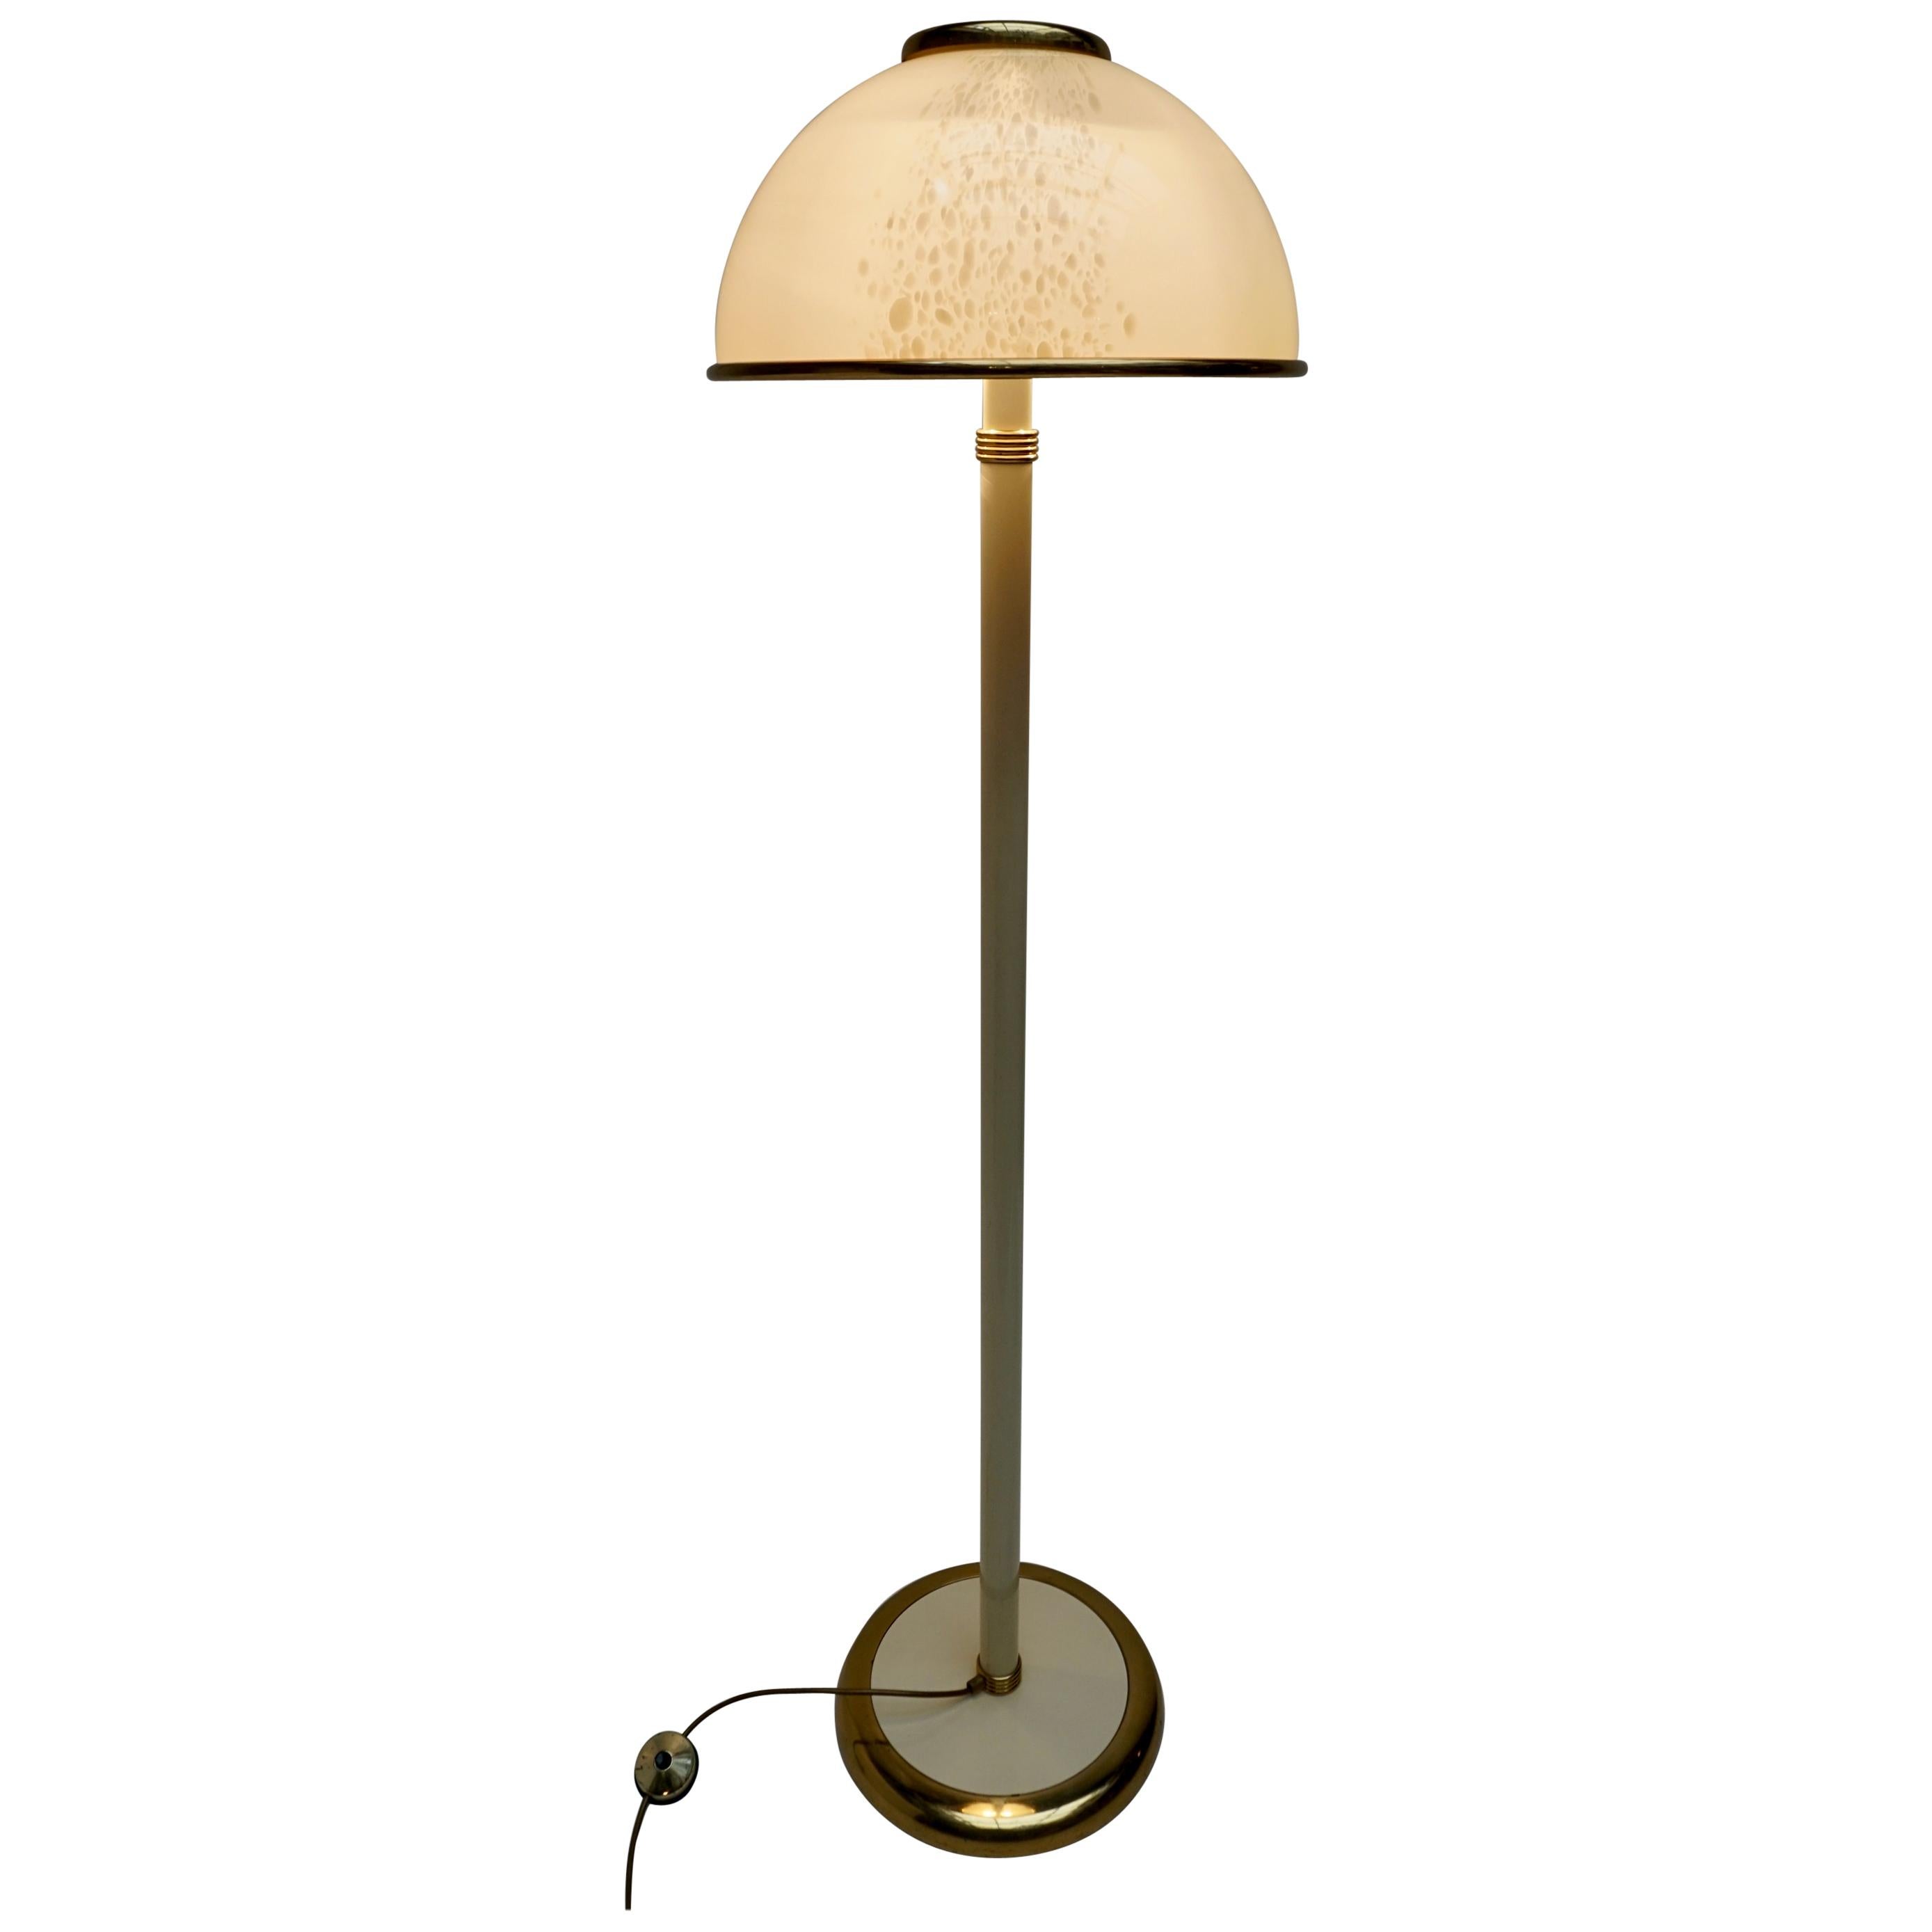 1970s Italian Floor Lamp in Brass and Artistic Murano Glass by F. Fabbian